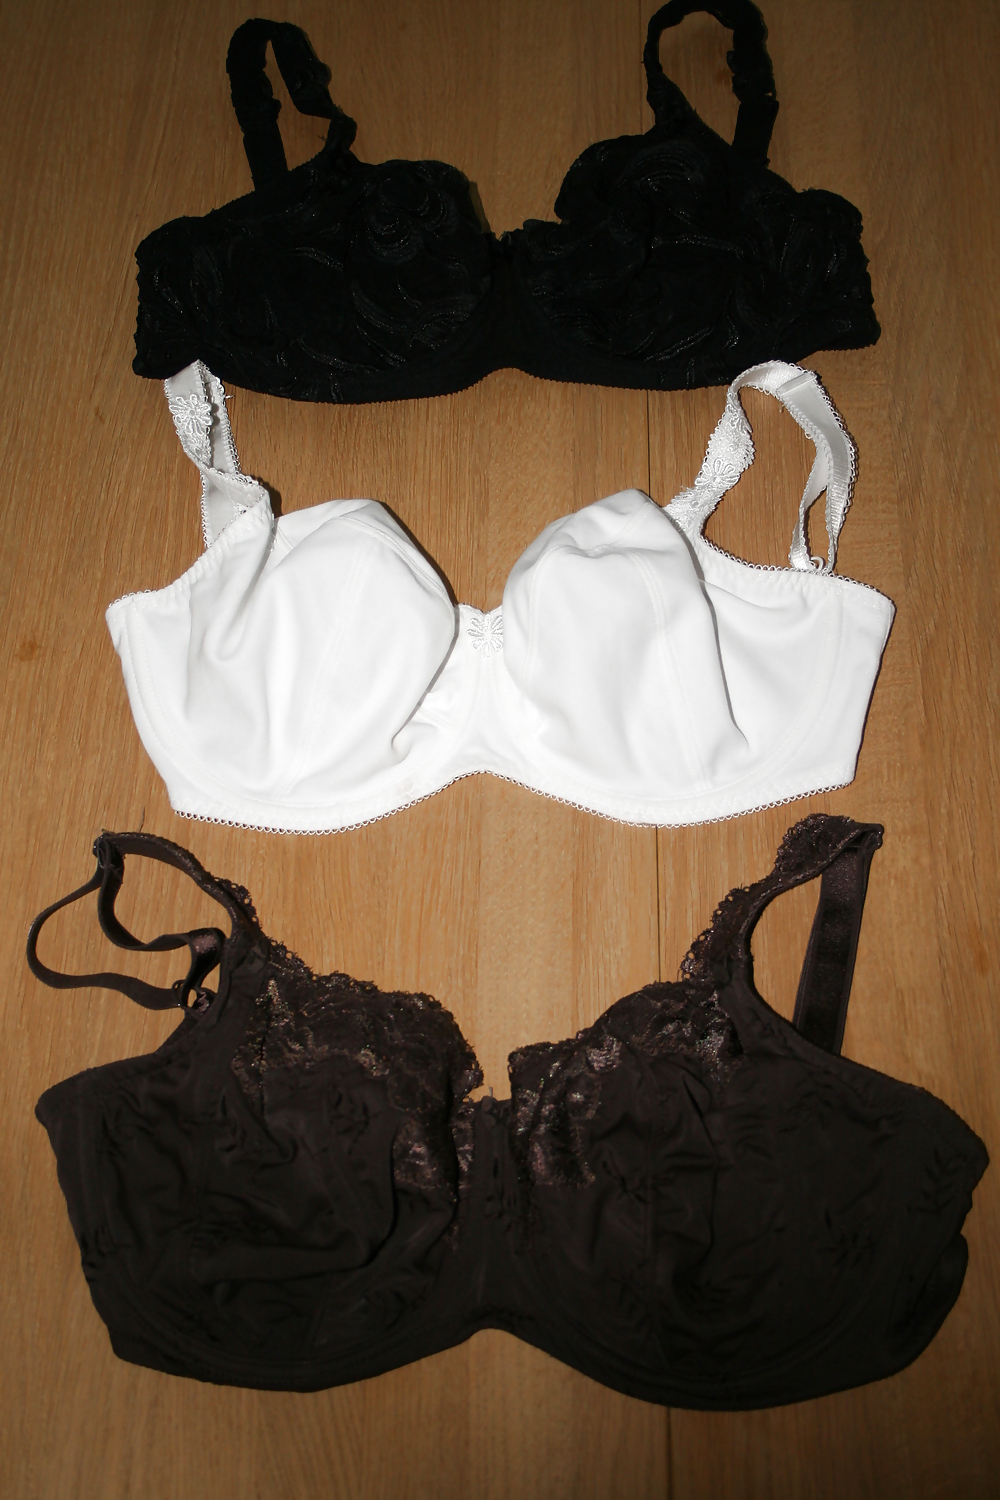 G cup bras and bigger #12082756